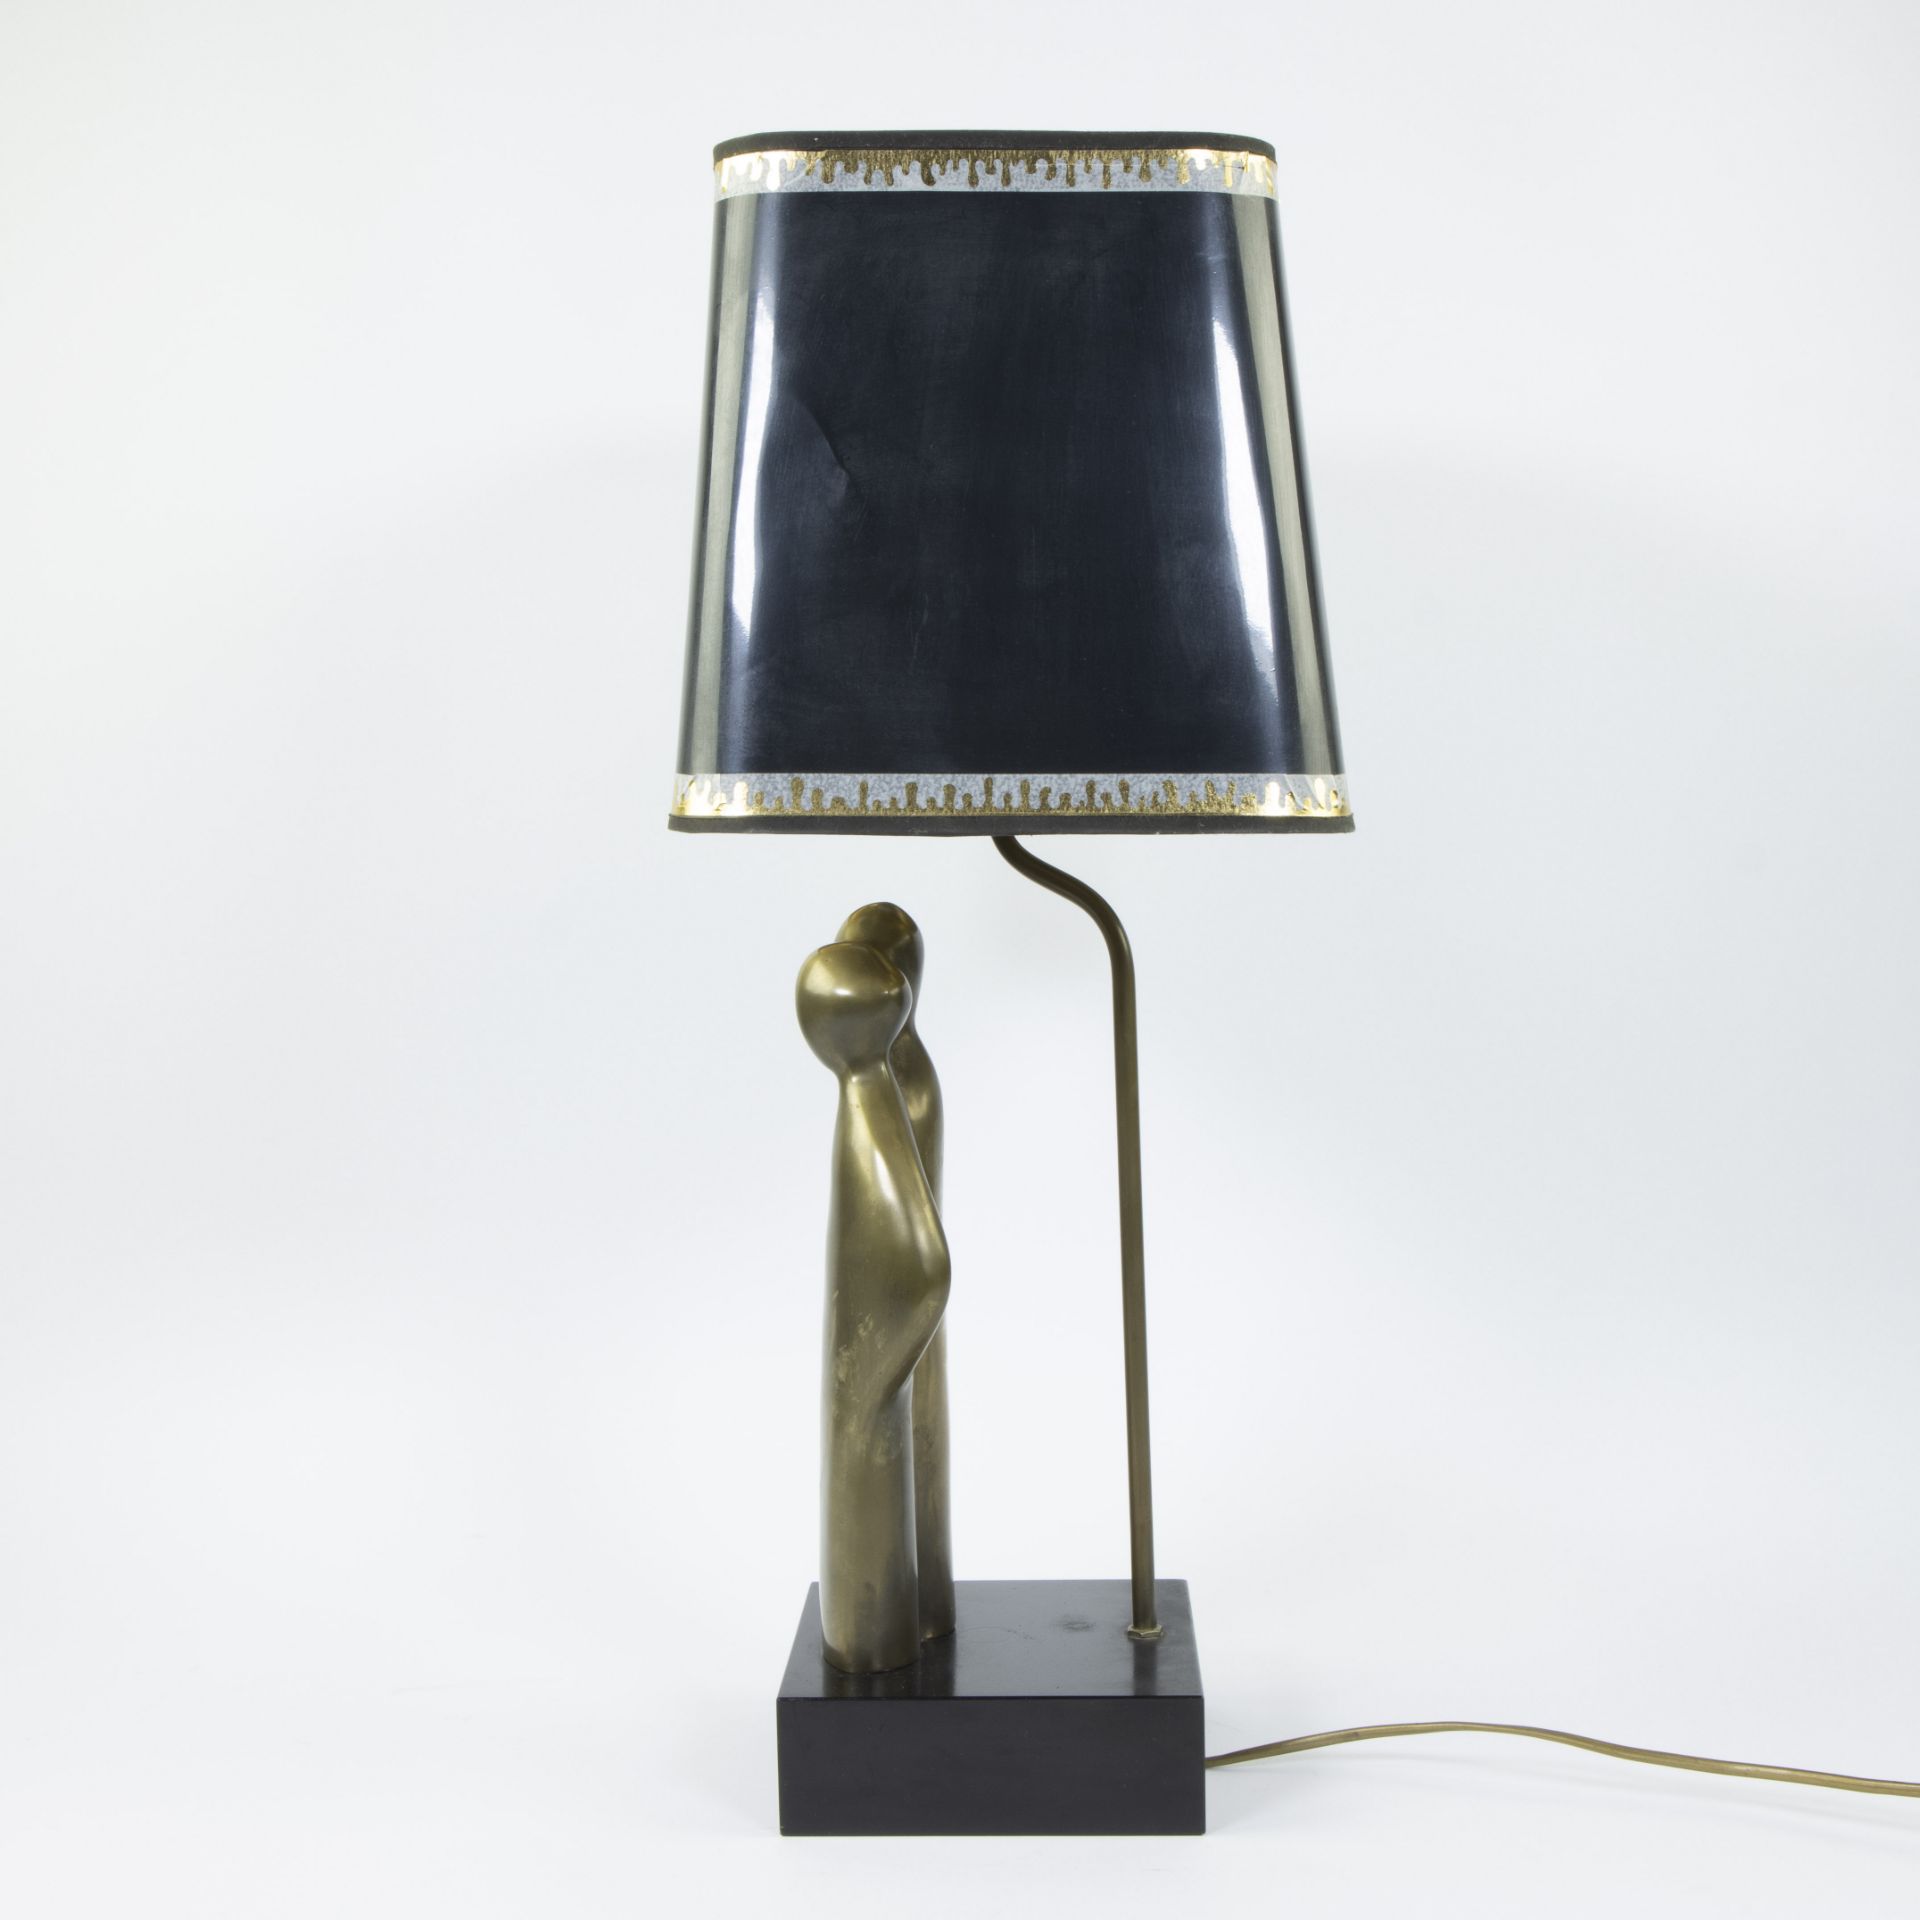 Vintage brass table lamp, style Maison Charles - Image 4 of 4